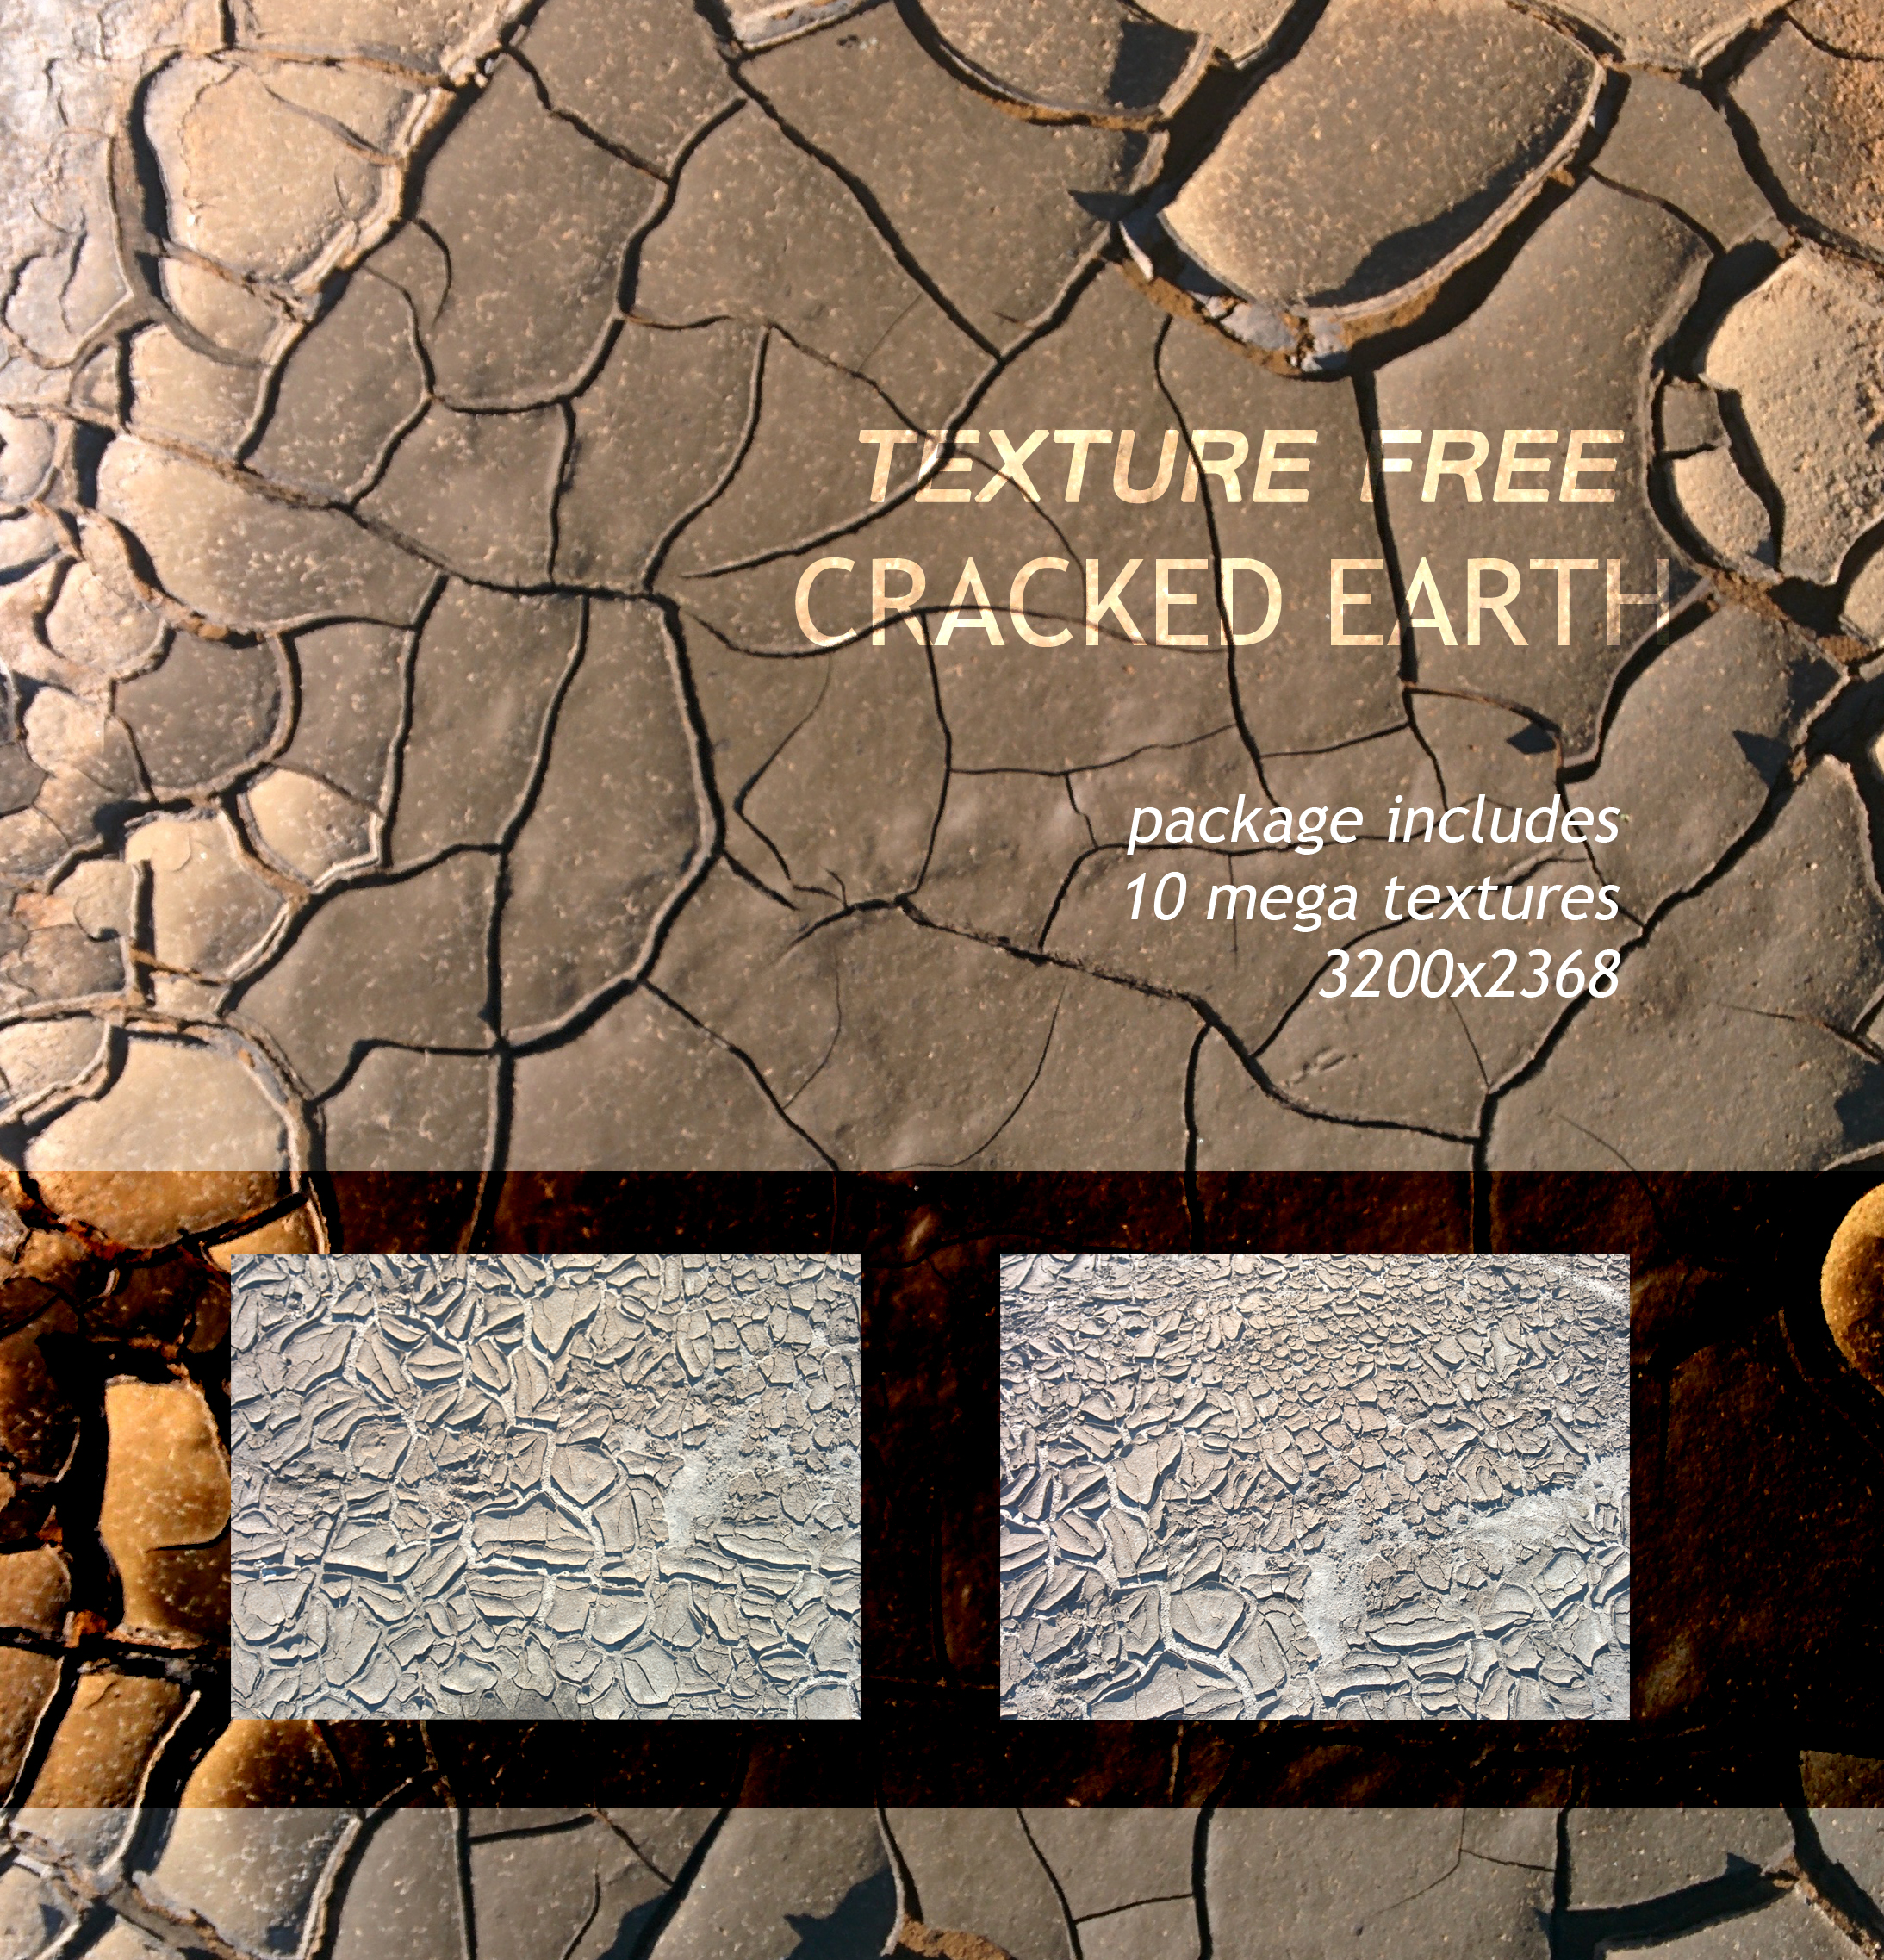 Cracked Earth By Rvrage Deviantart (FREE TEXTURE)